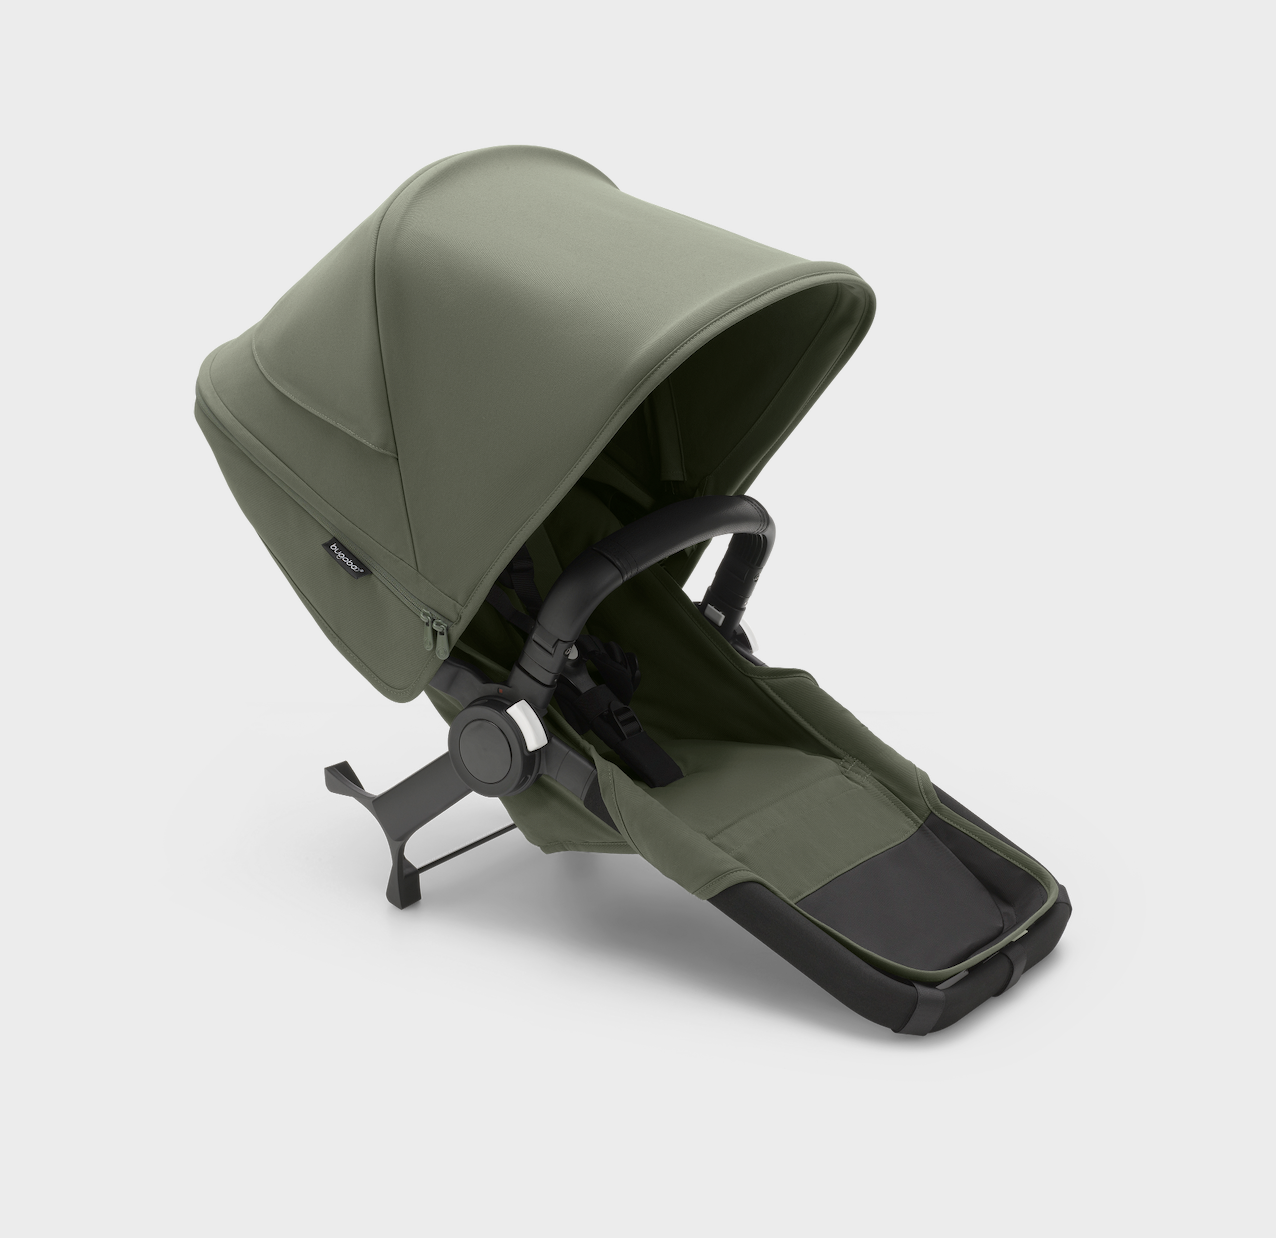 Bugaboo Donkey 5 Twin Pushchair & Maxi-Cosi Pebble 360 Travel System - Black / Forest Green